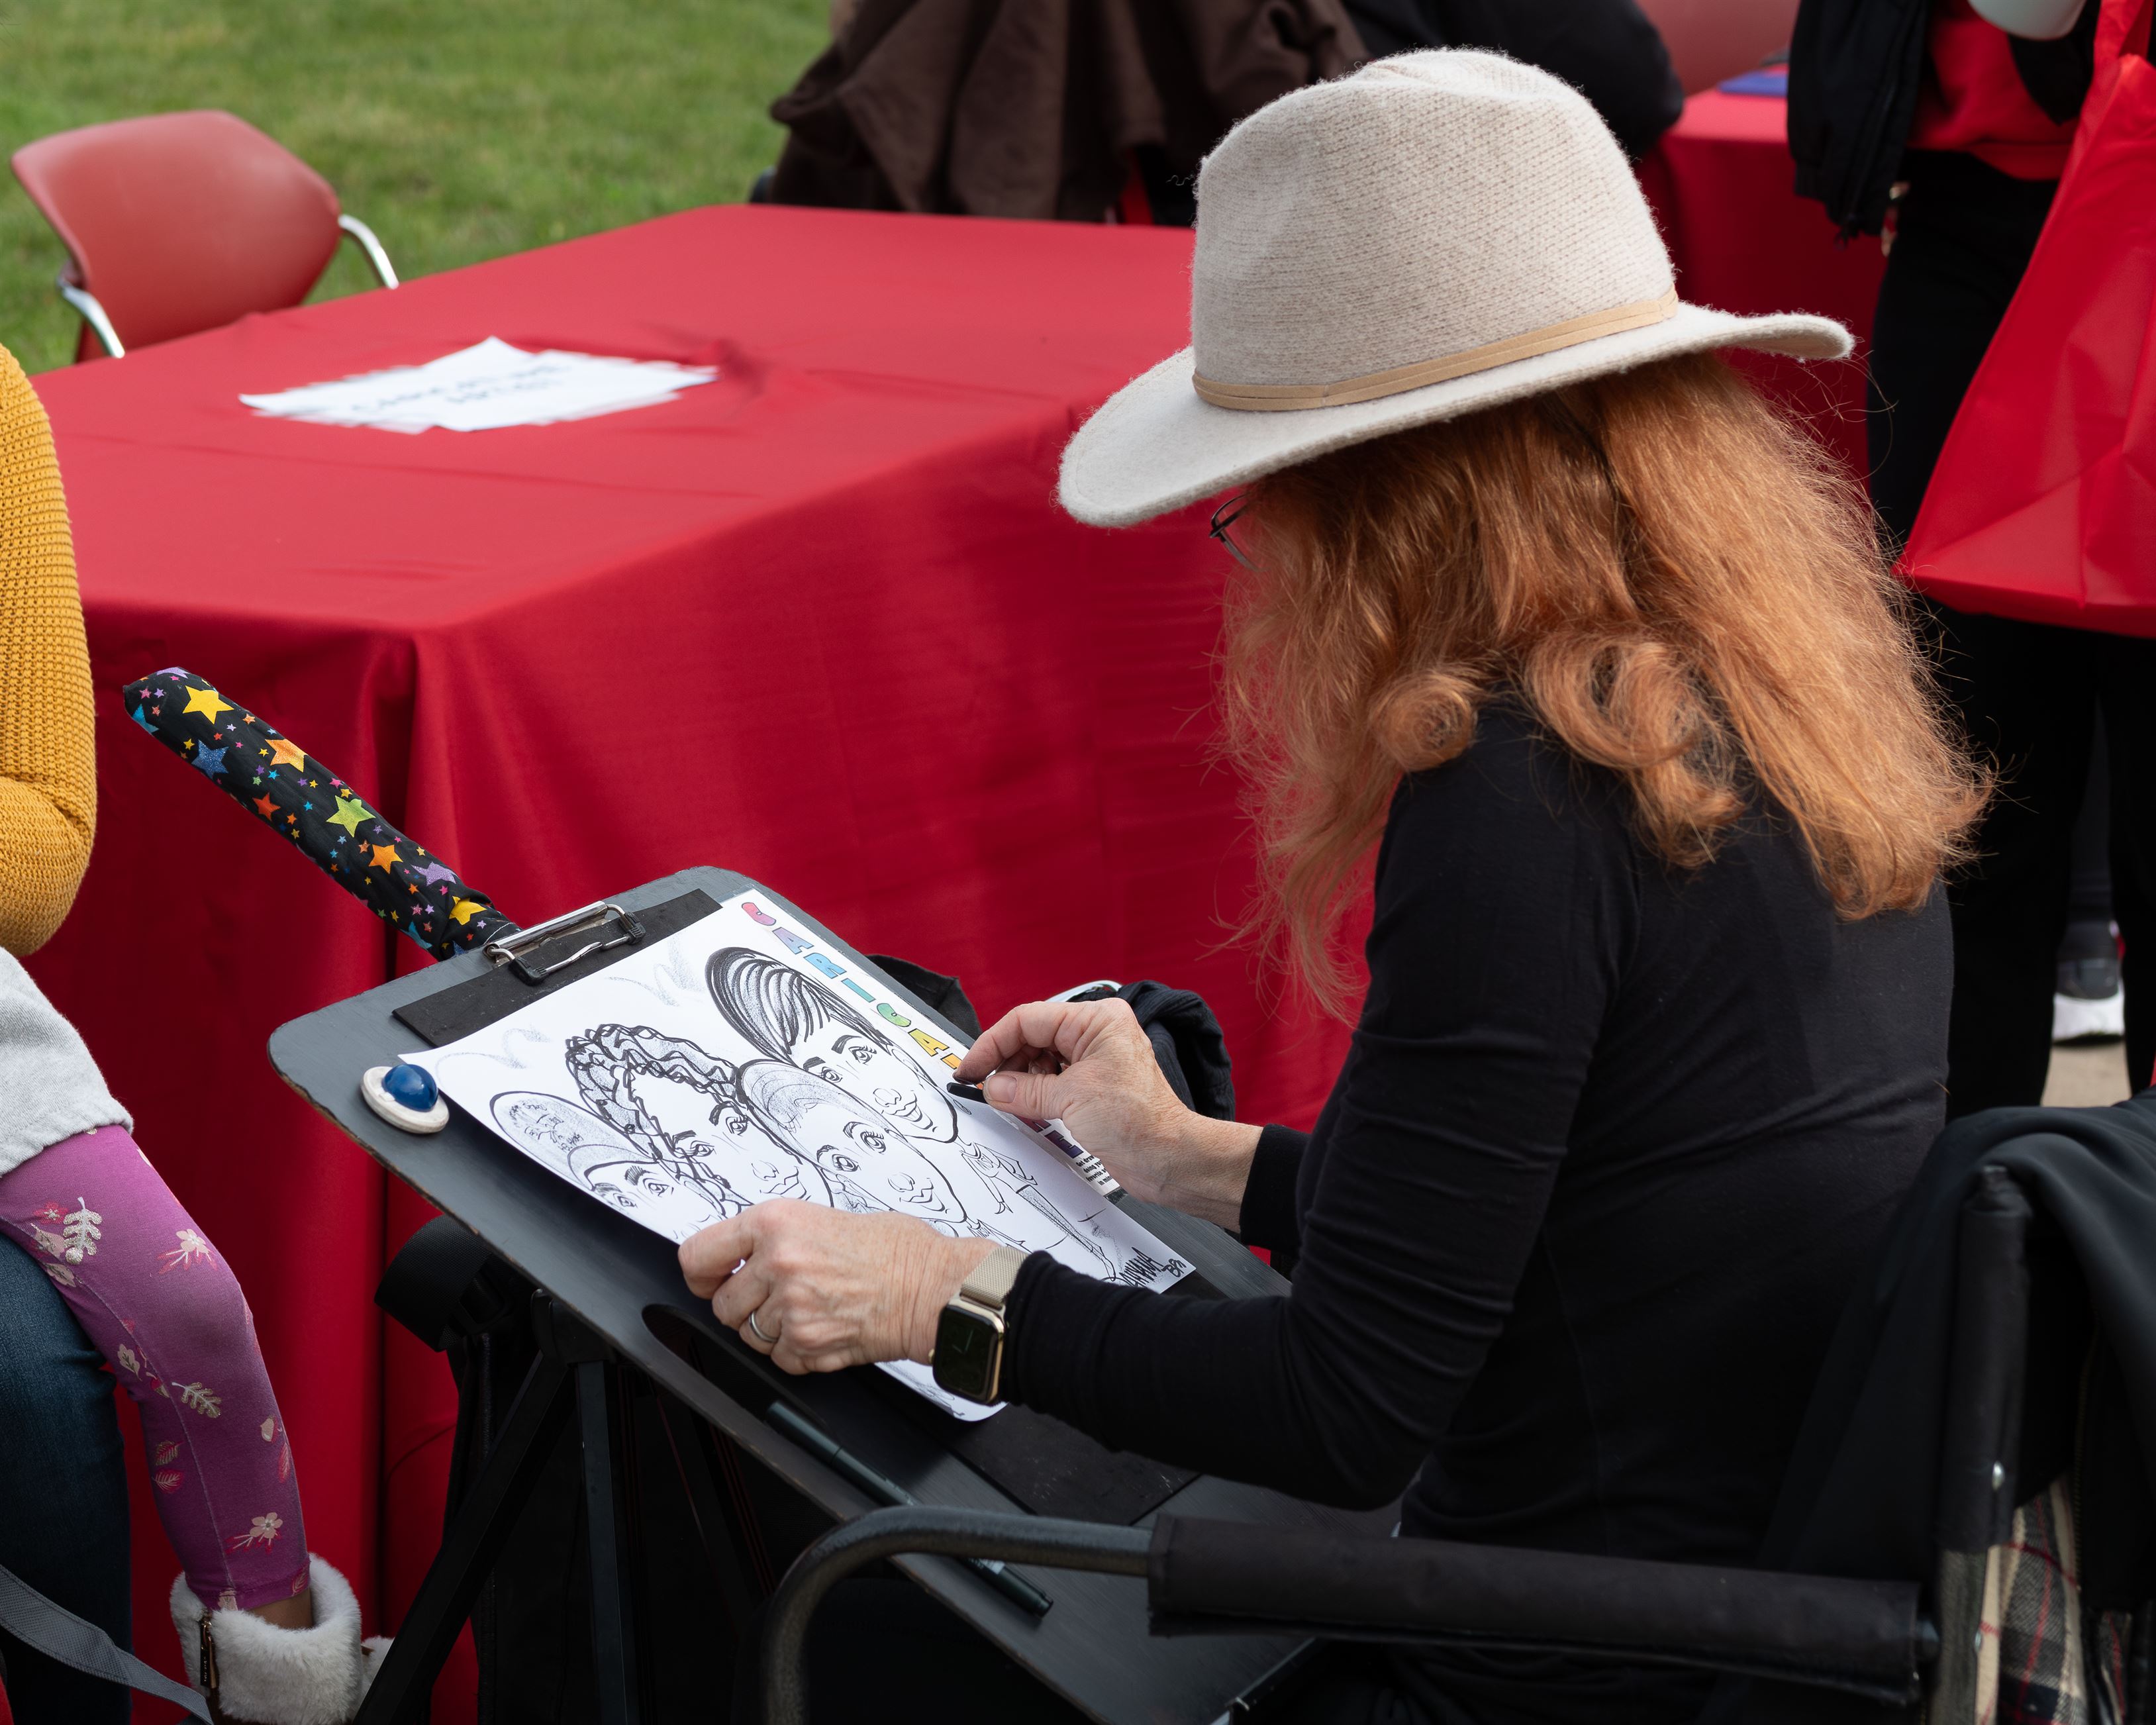 An artist draws for some people during Homecoming day festivities.  Photo courtesy of Maral Tutunjian